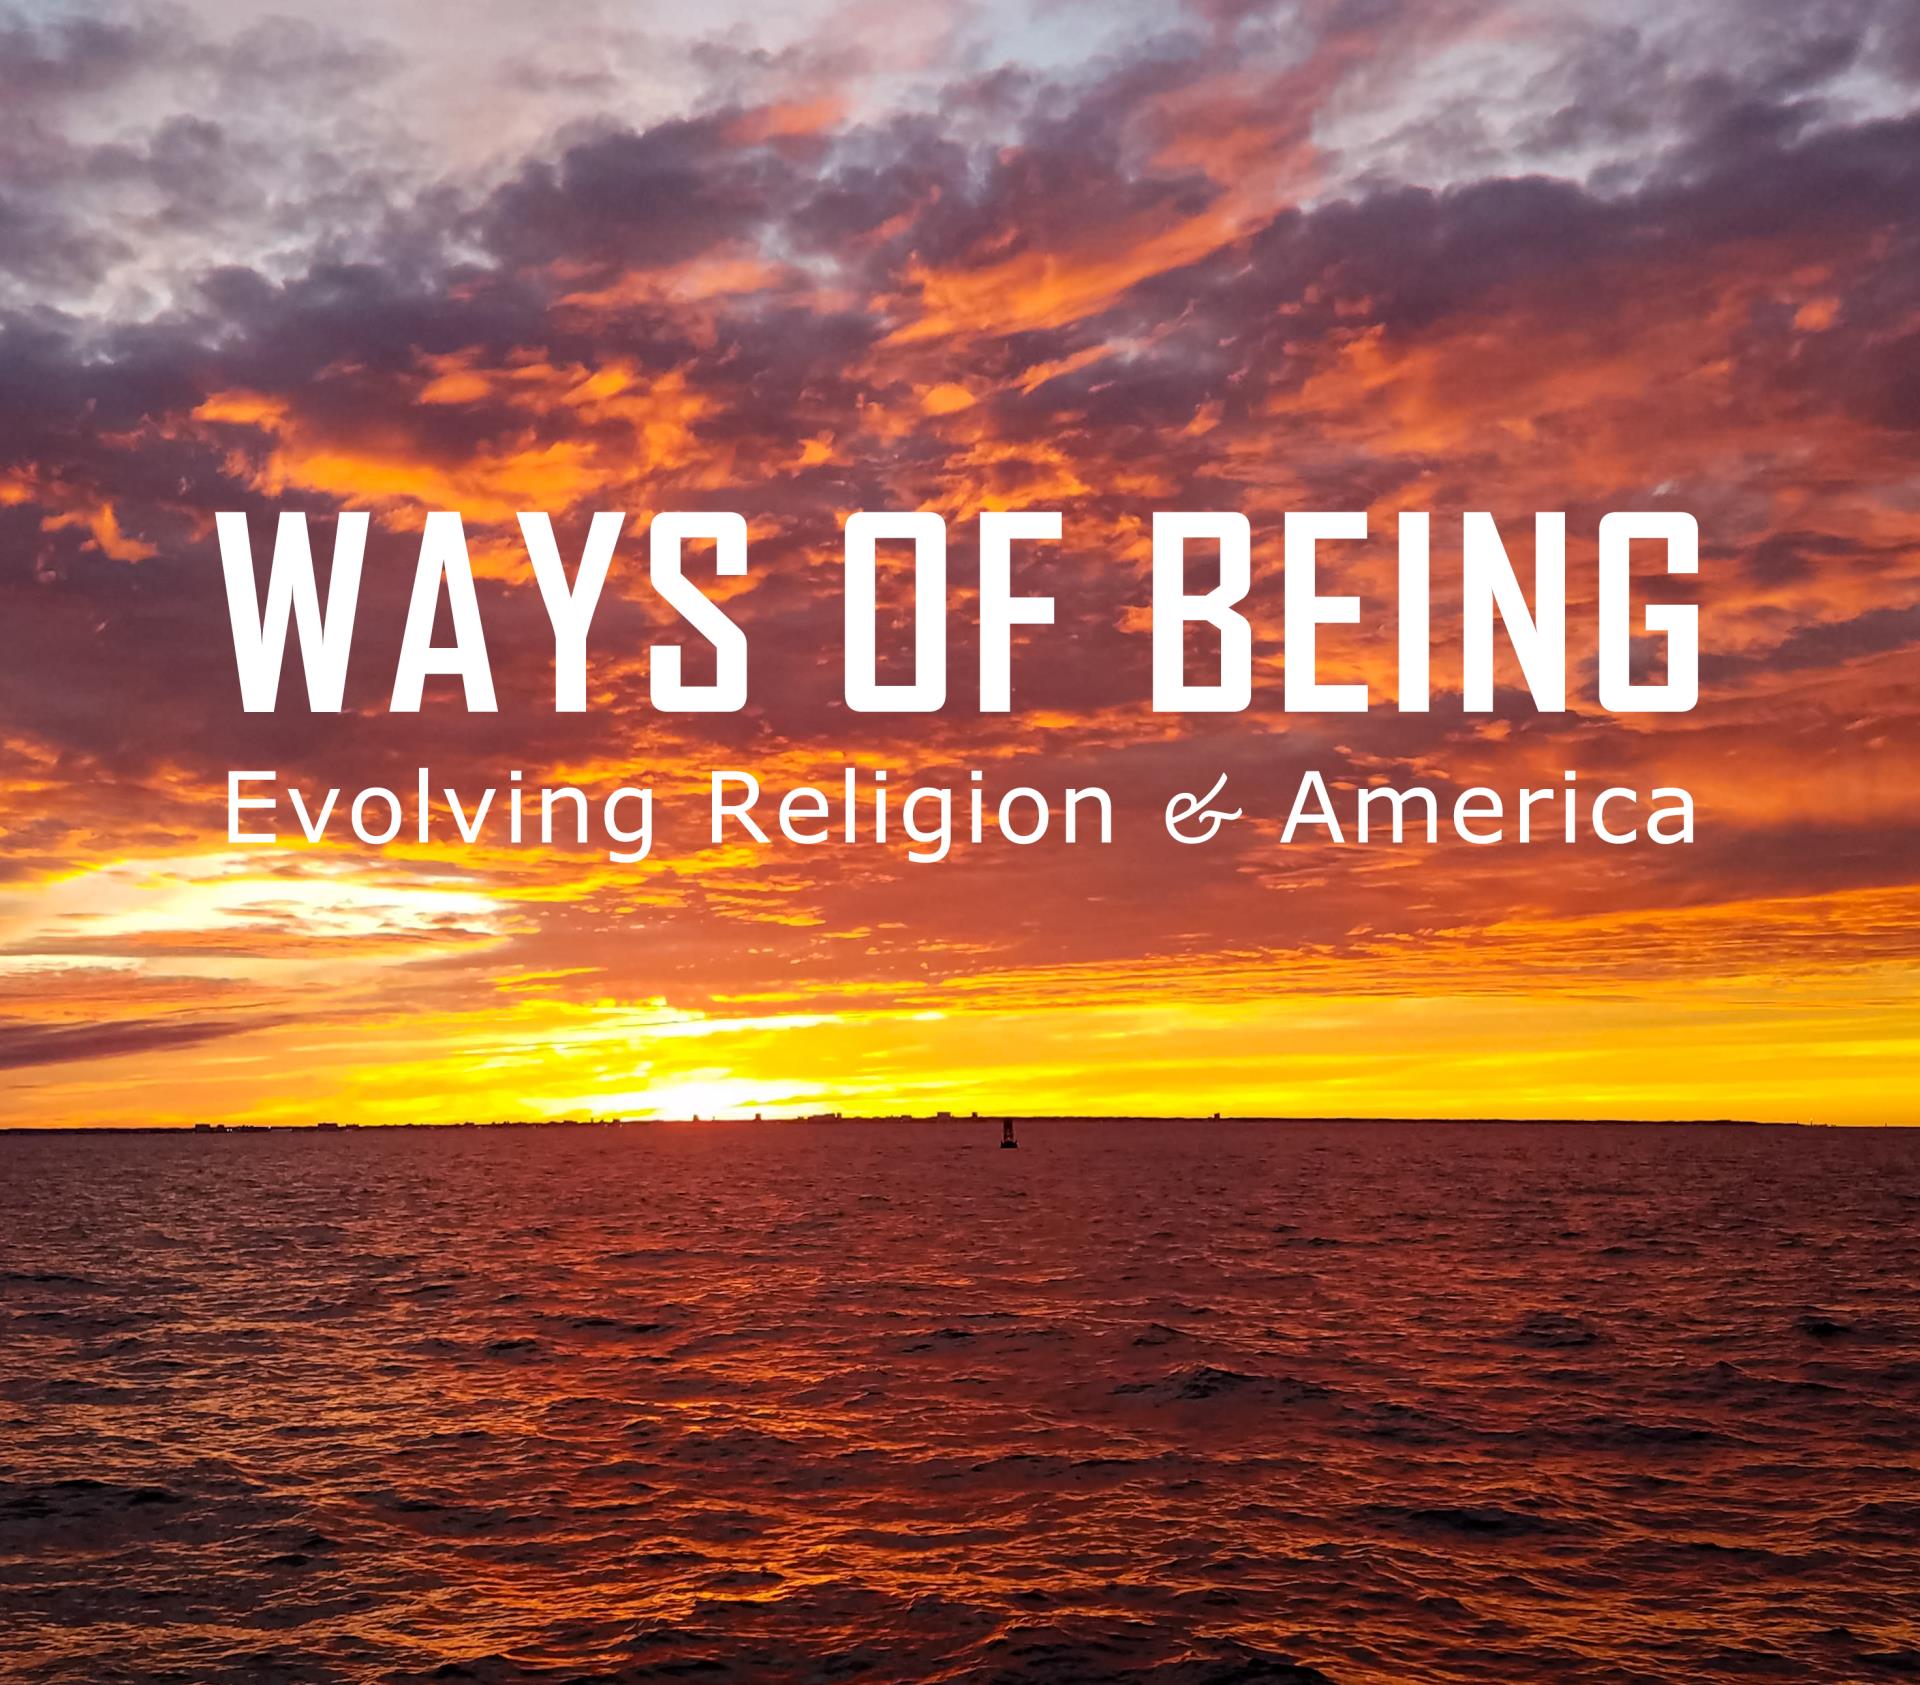 Ways of Being: Evolving Religion & America Symposium logo over an ocean sunset